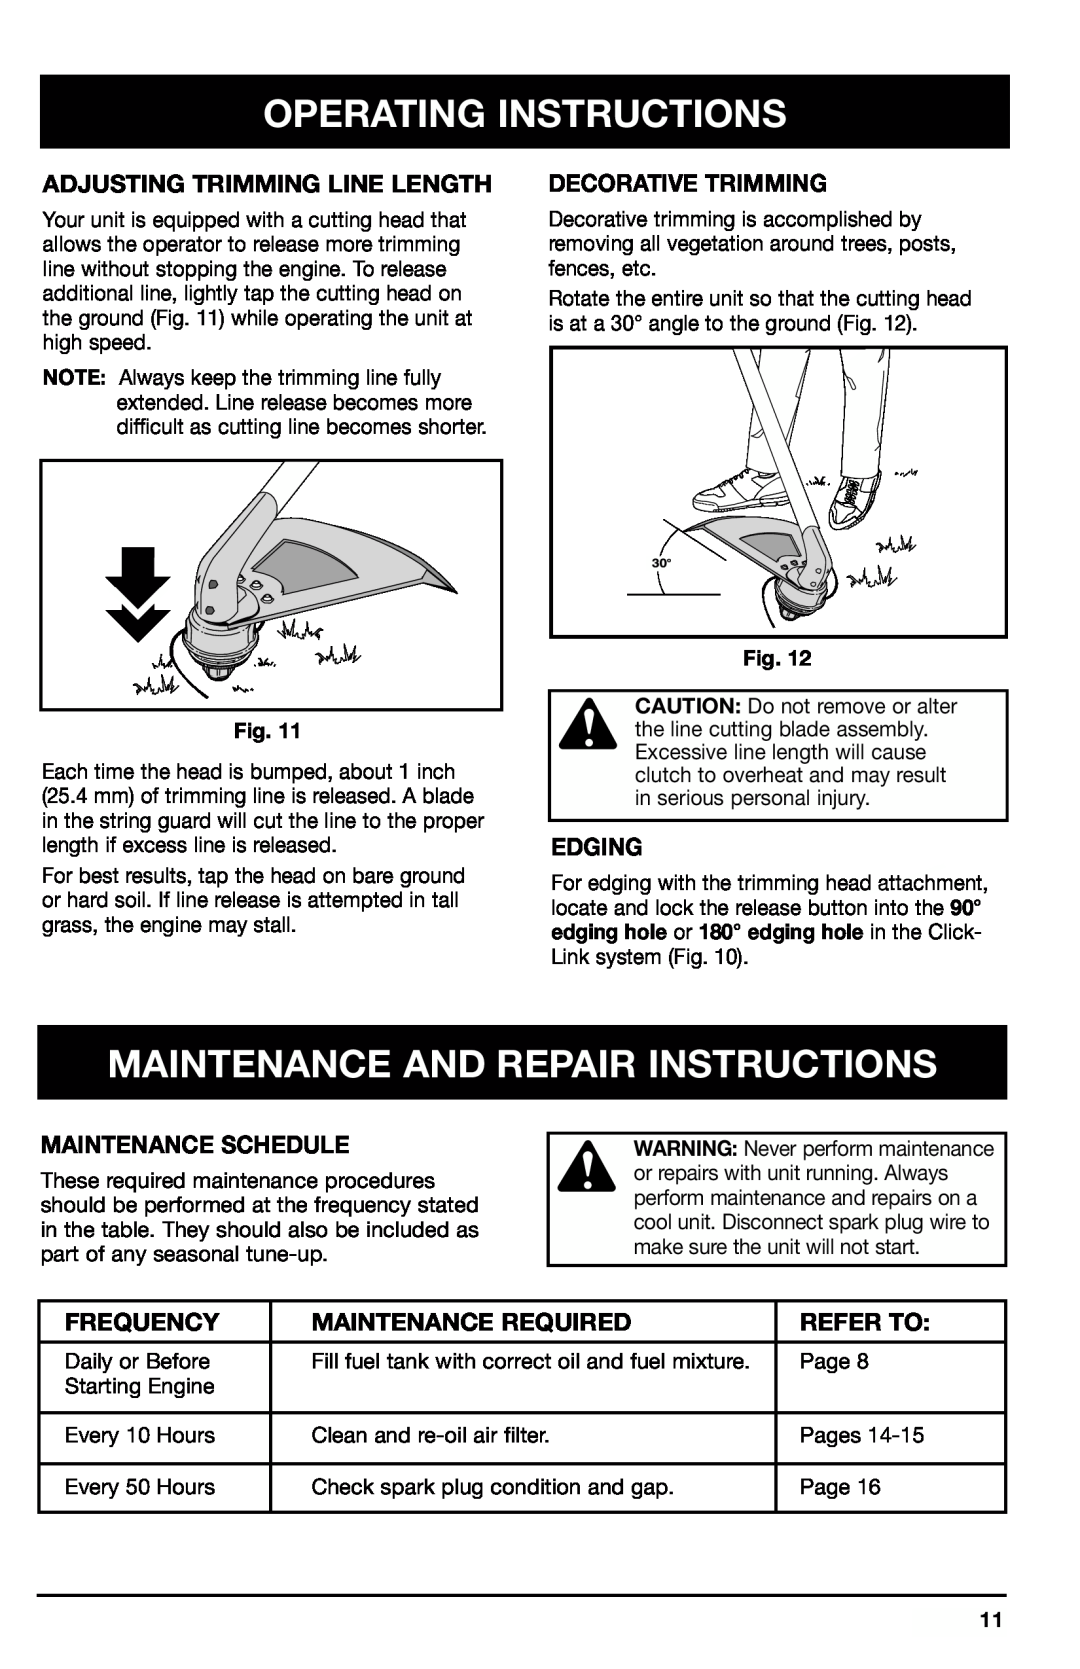 Ryobi 2075r Maintenance And Repair Instructions, Adjusting Trimming Line Length, Decorative Trimming, Edging, Frequency 